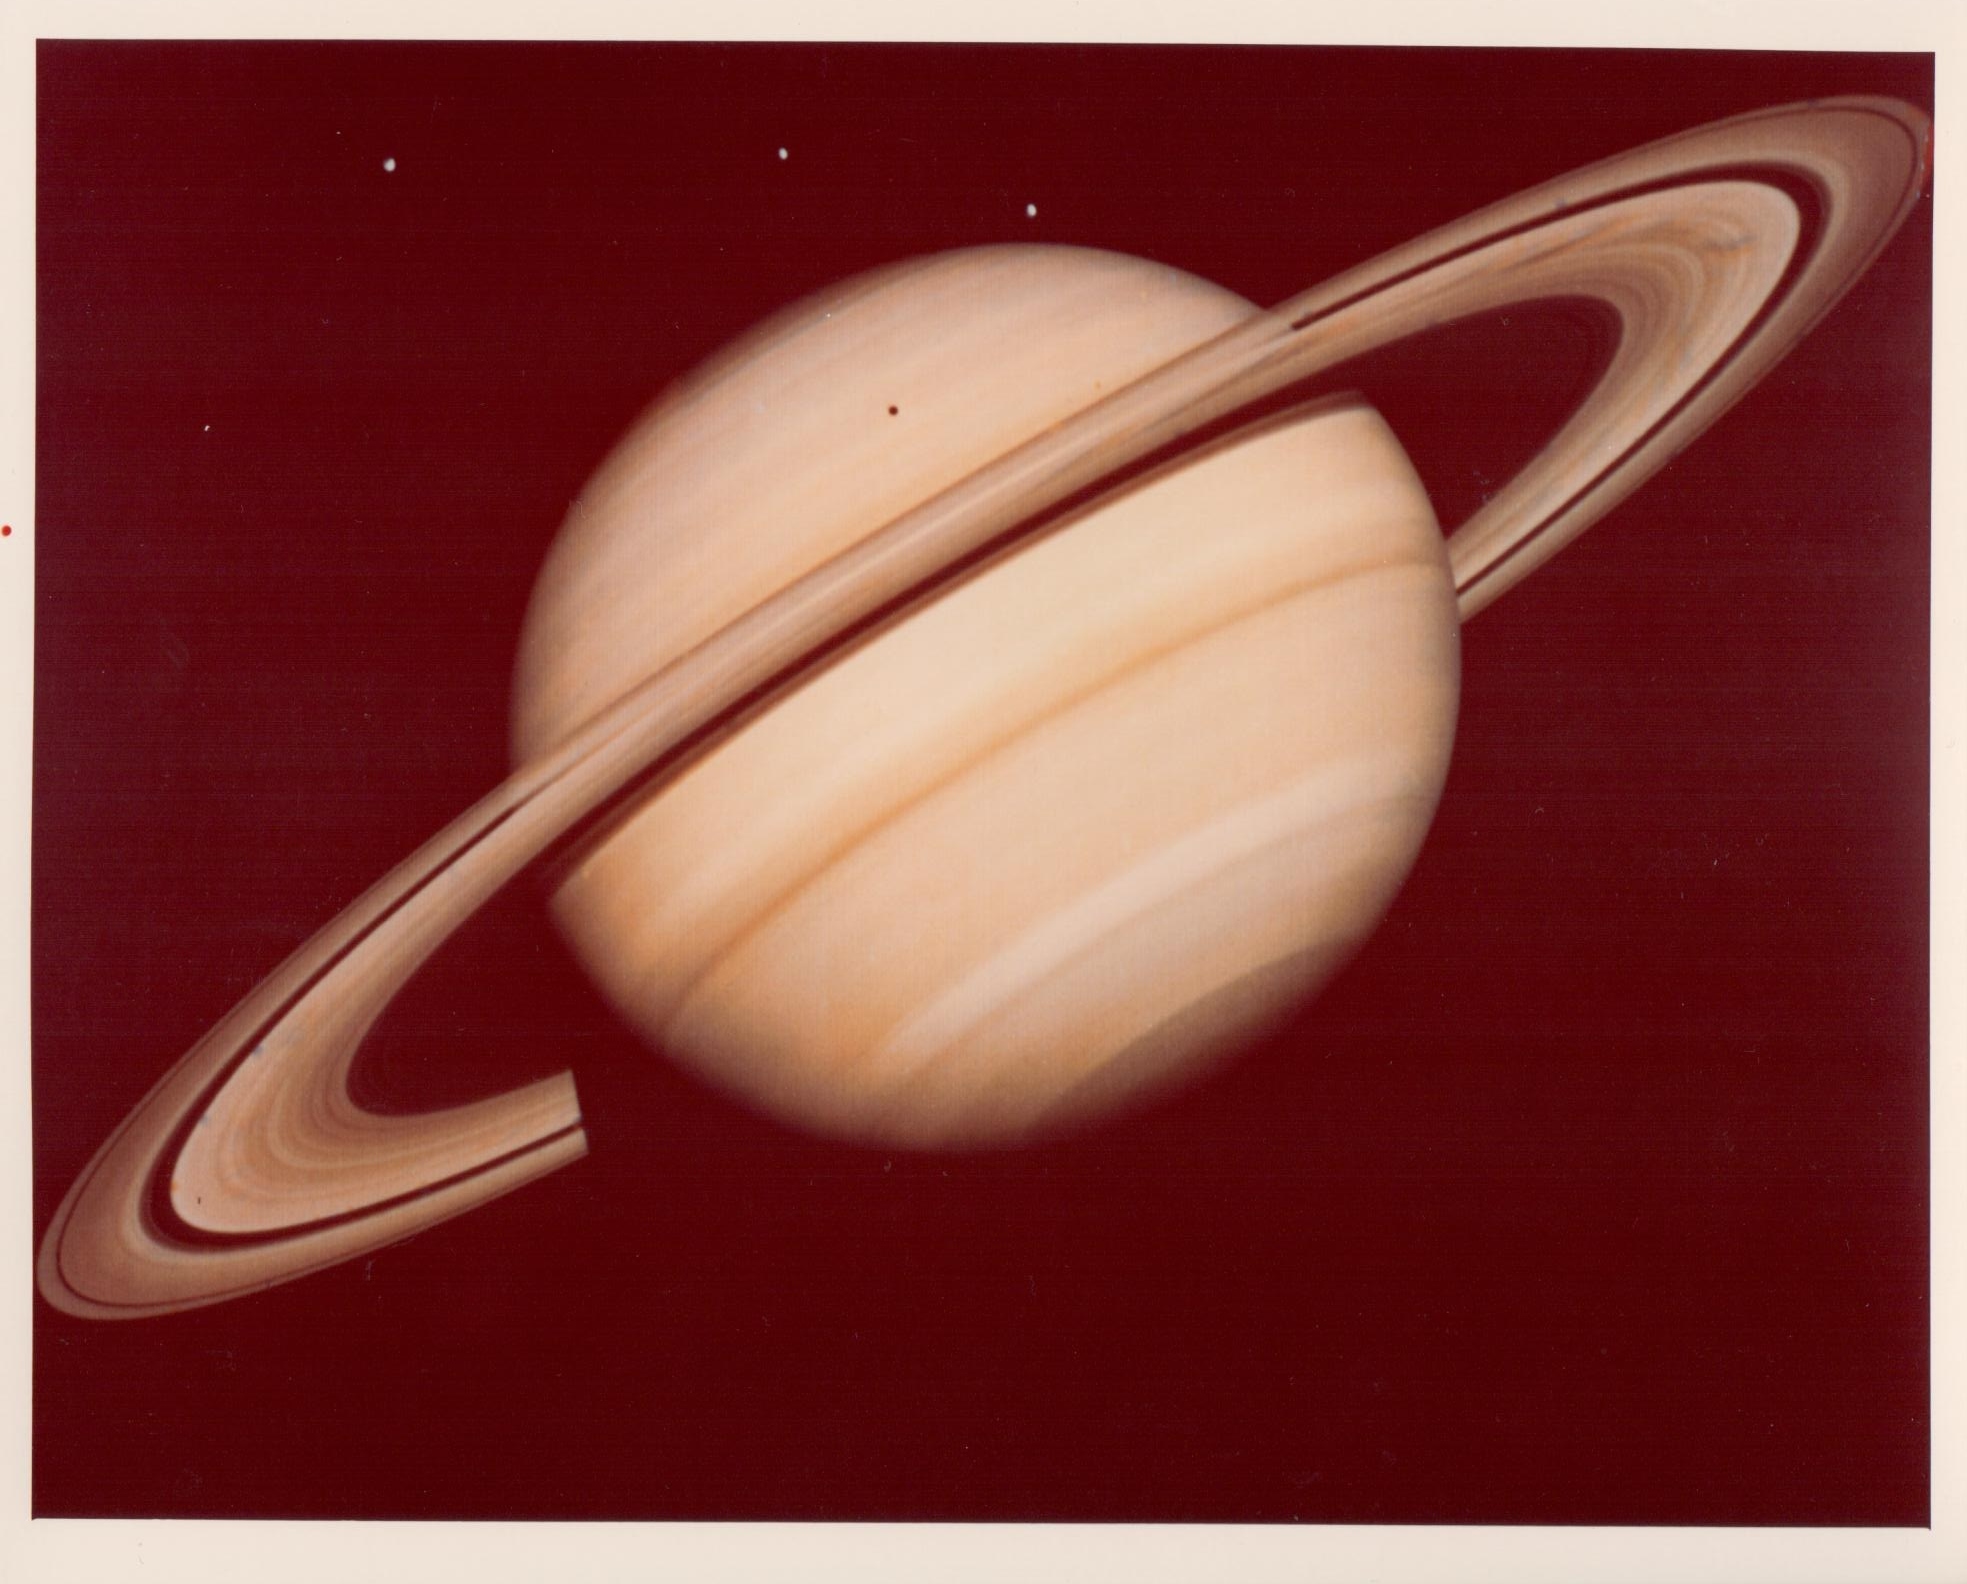 17 Vintage NASA Photos Of Exploration In The Space Age